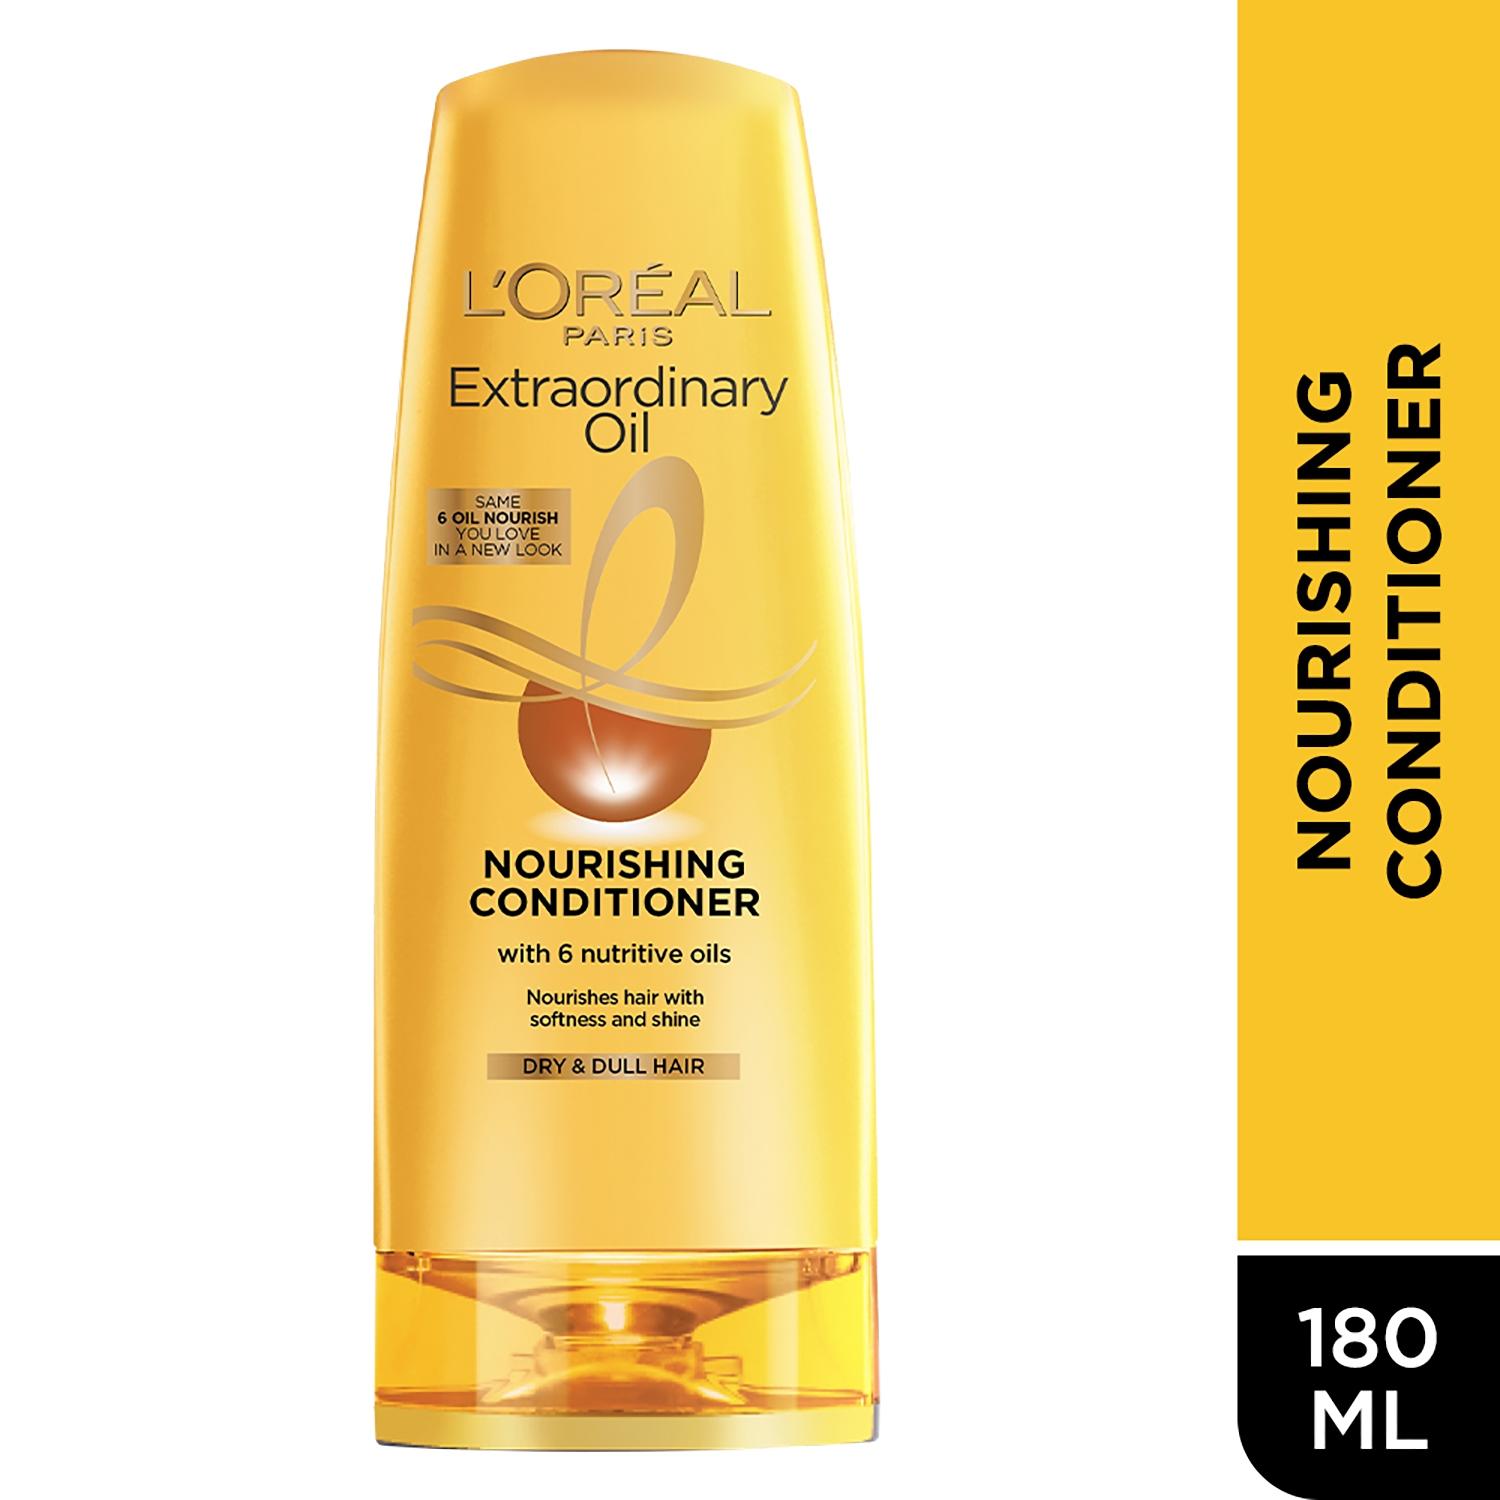 l'oreal paris extraordinary oil nourishing conditioner for dry & dull hair (180ml)